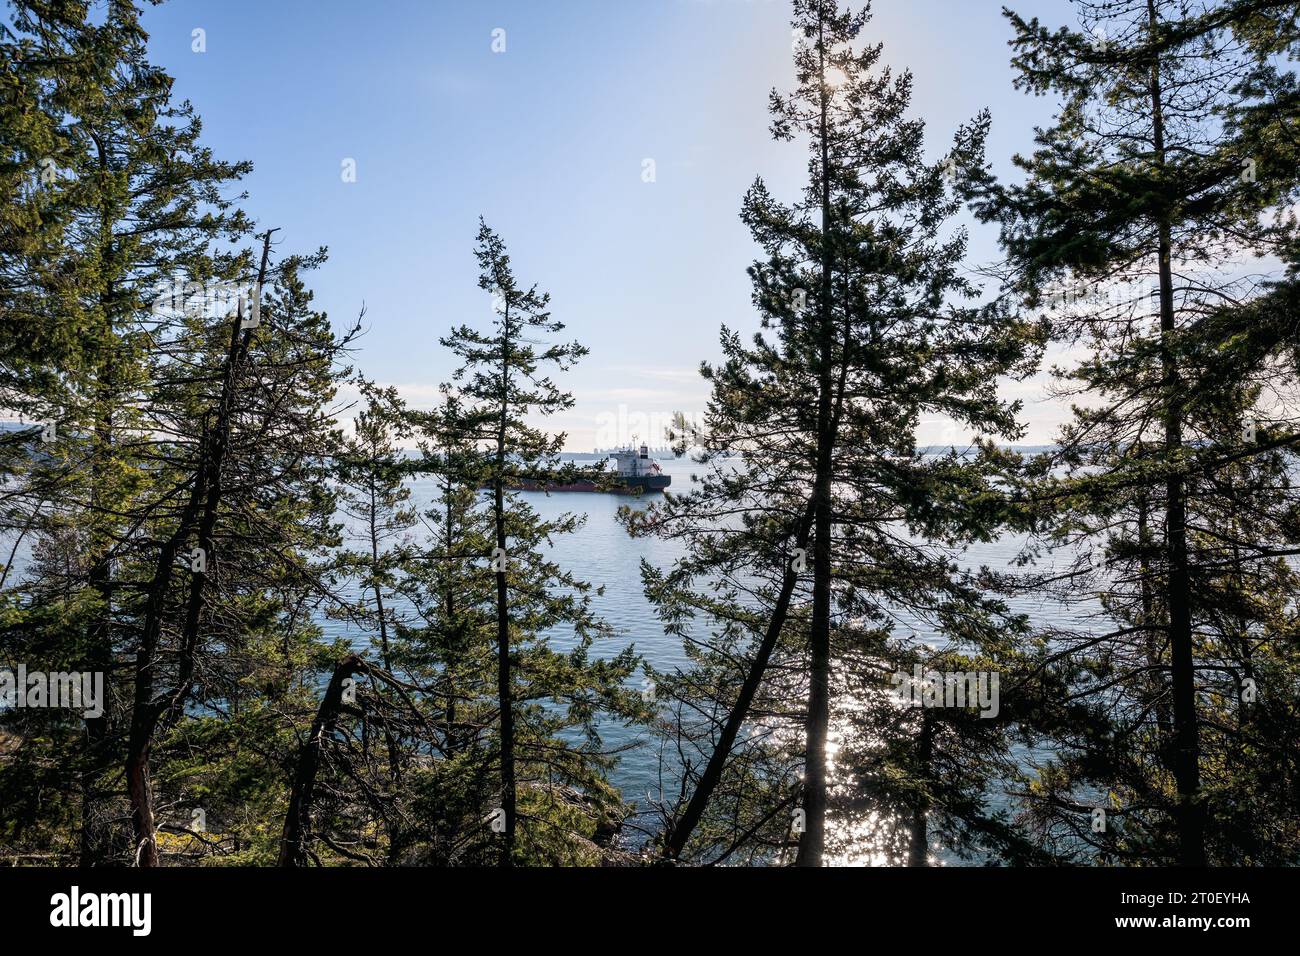 Cargo ship anchored behind trees with far off city skyline. Scenic maritime transport background. Environmental impact of cargo shipping concept. Sele Stock Photo